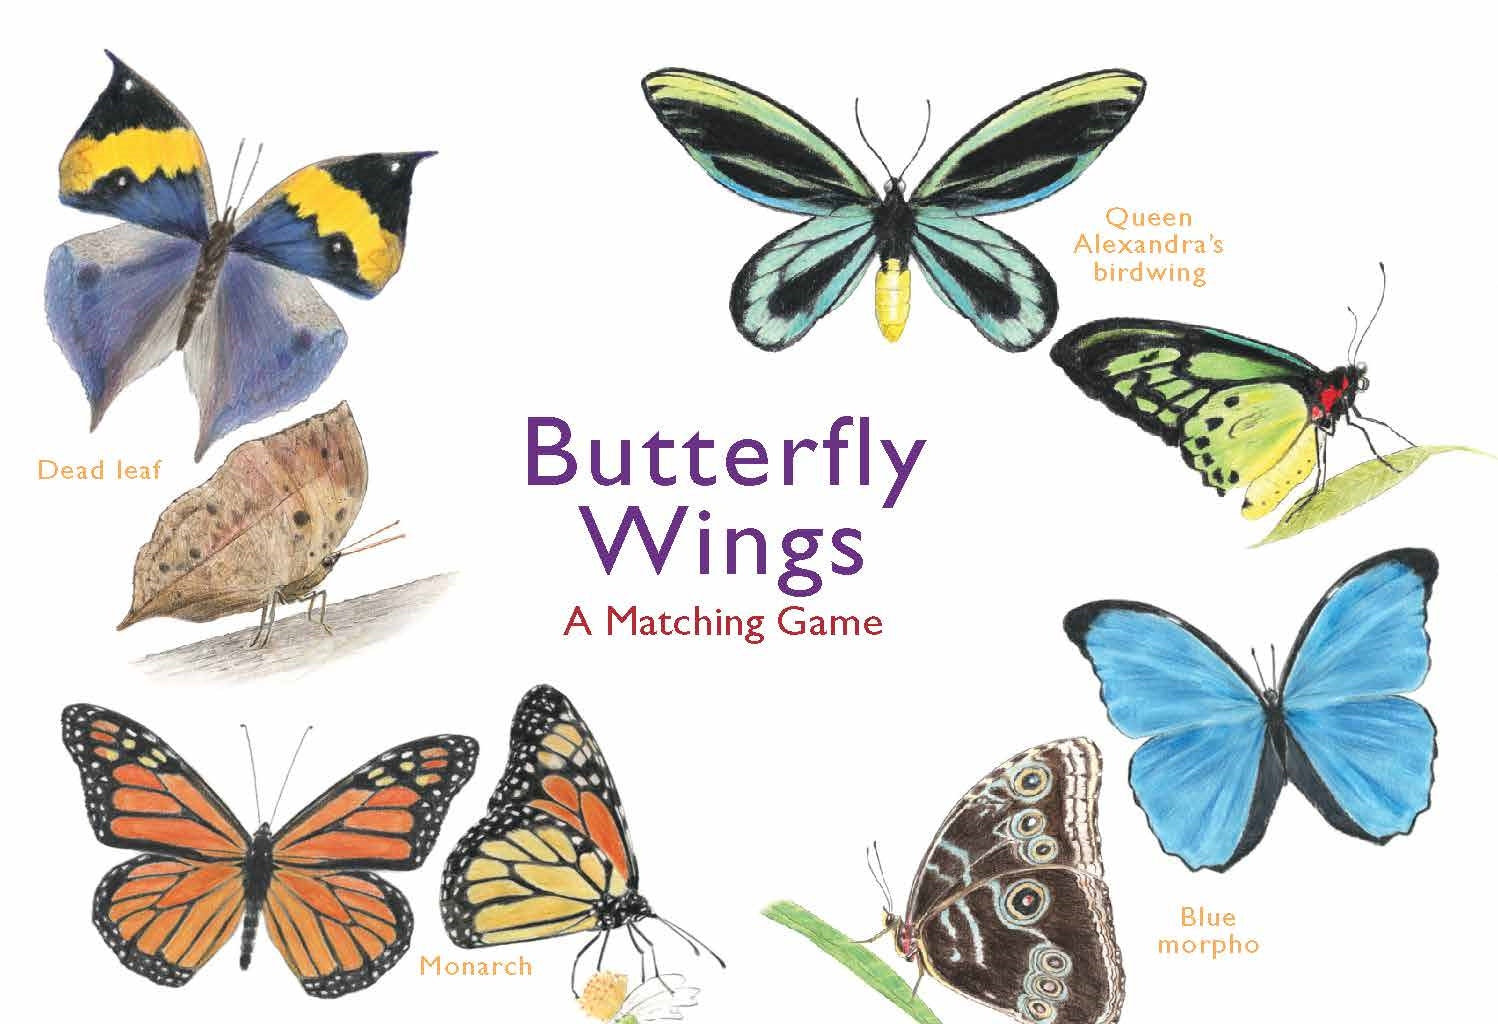 Butterfly Wings by Christine Berrie, Laurence King Publishing